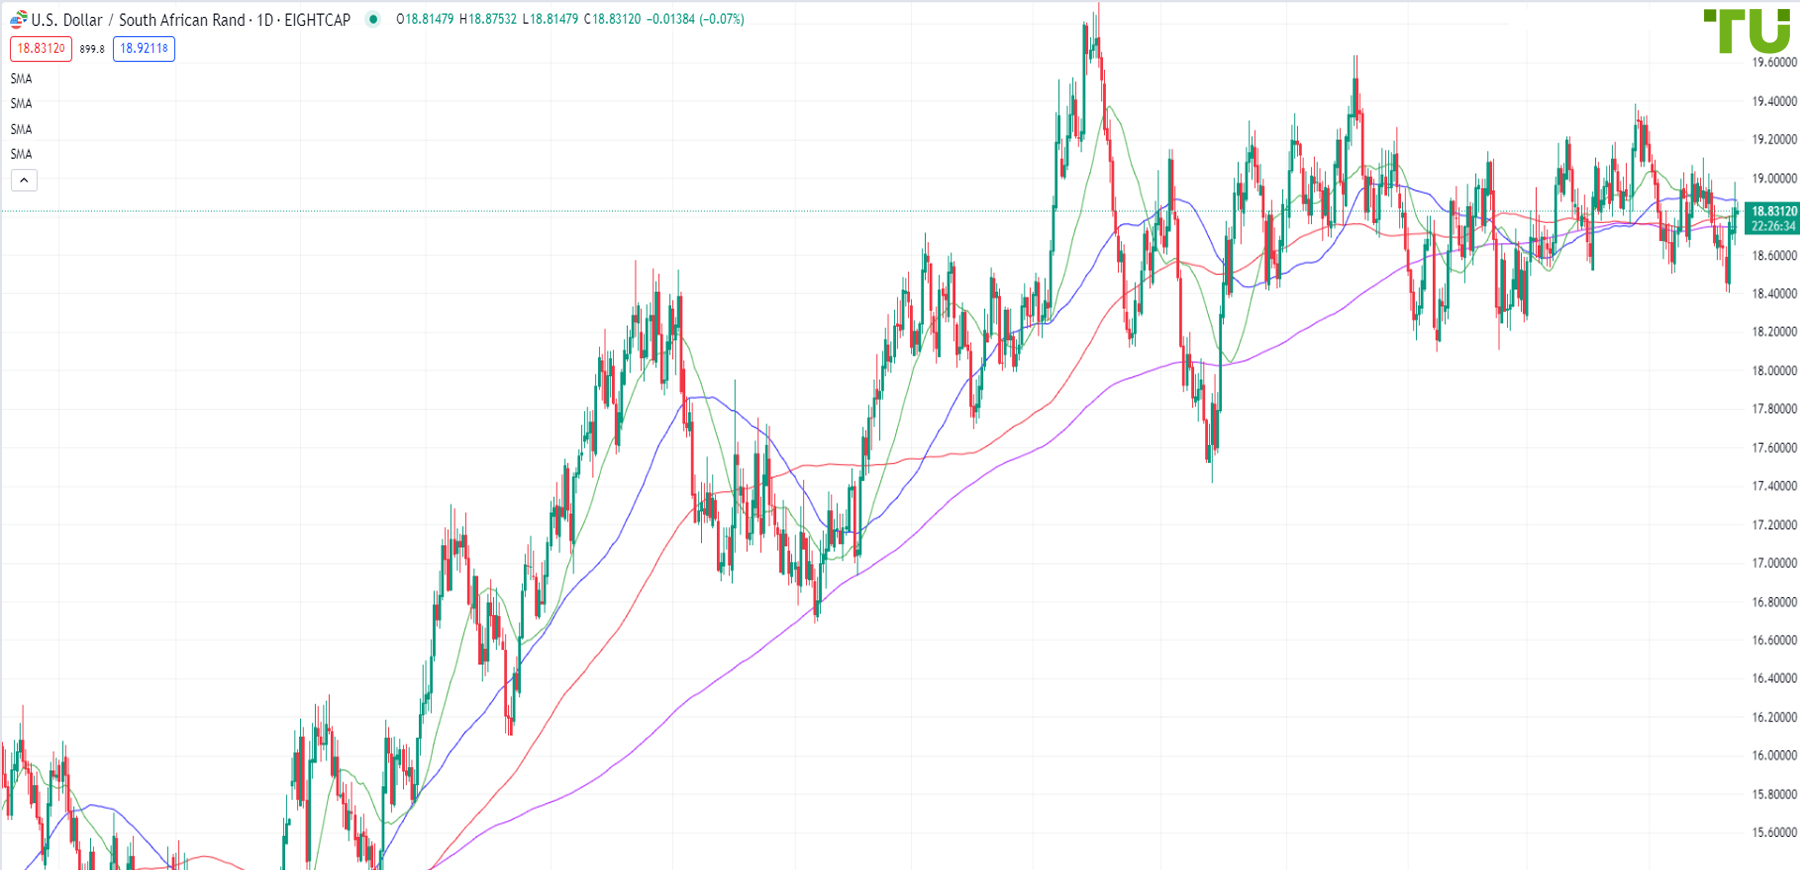 USD/ZAR continued its recovery